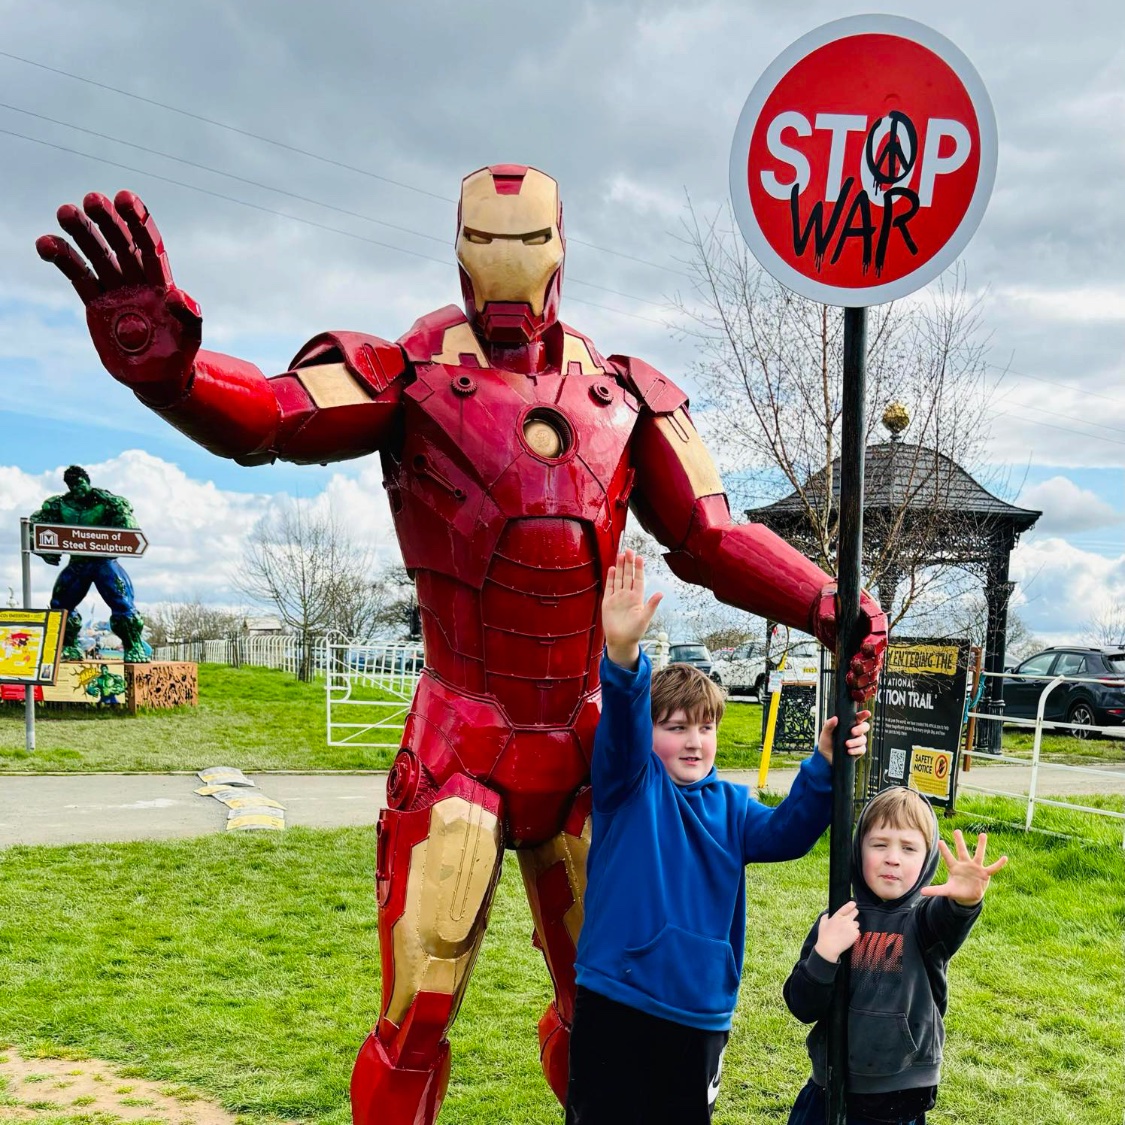 STOP WAR!! It's great to see your little ones interacting with our sculptures. We try to spread these important messages through our different styles of art. Here we have our much loved Ironman, made entirely out of recycled metal 🛑 PHOTO CREDIT: Emma Mounsey